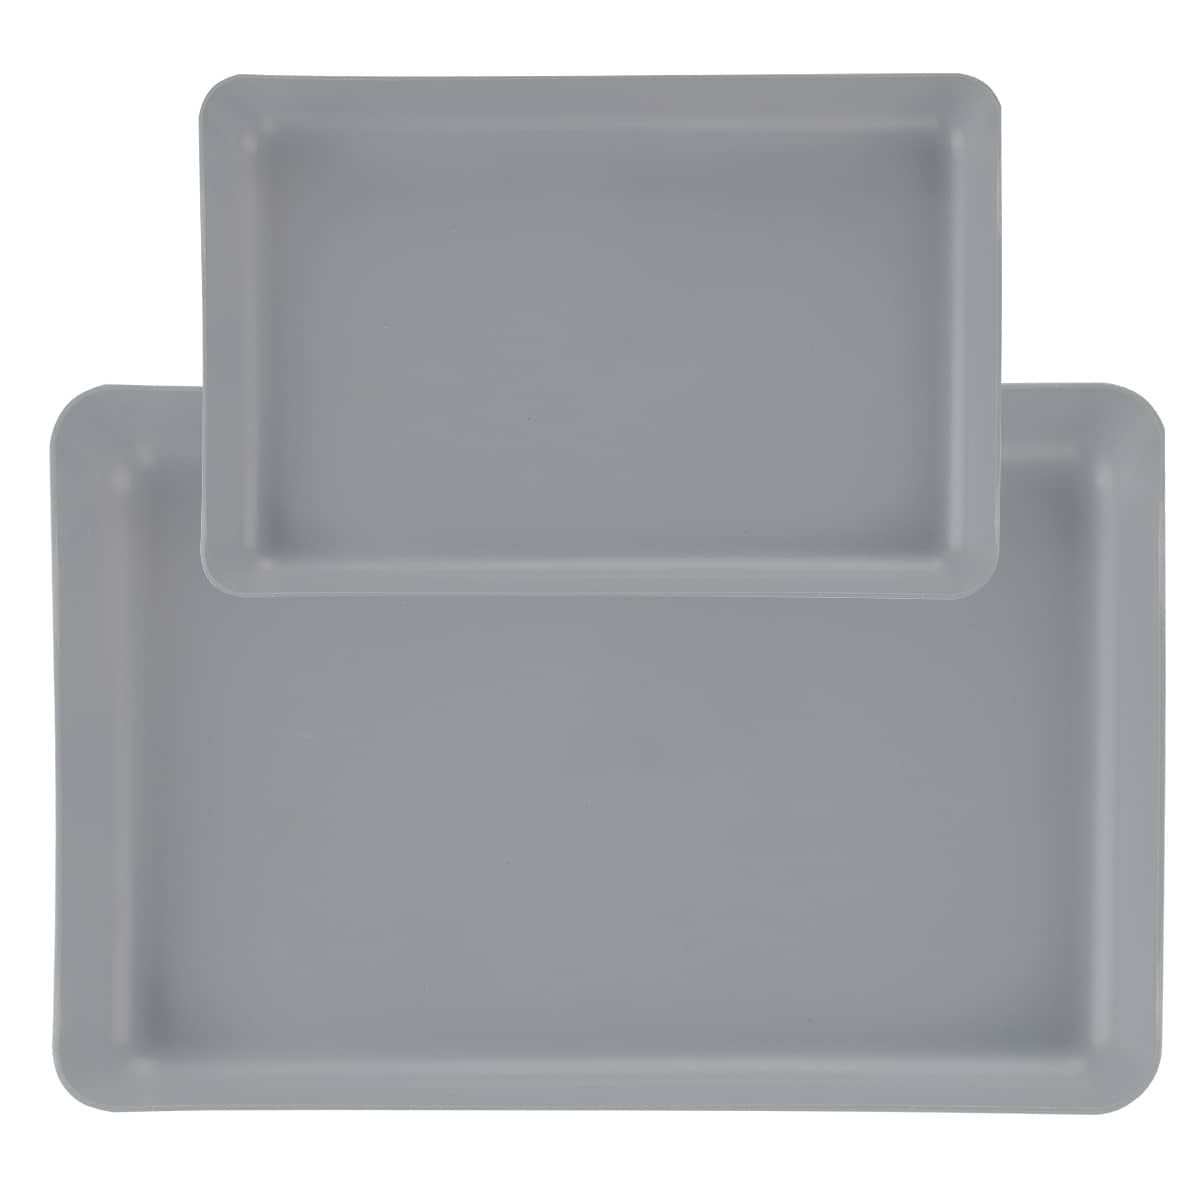 Small butcher tray& Large butcher tray